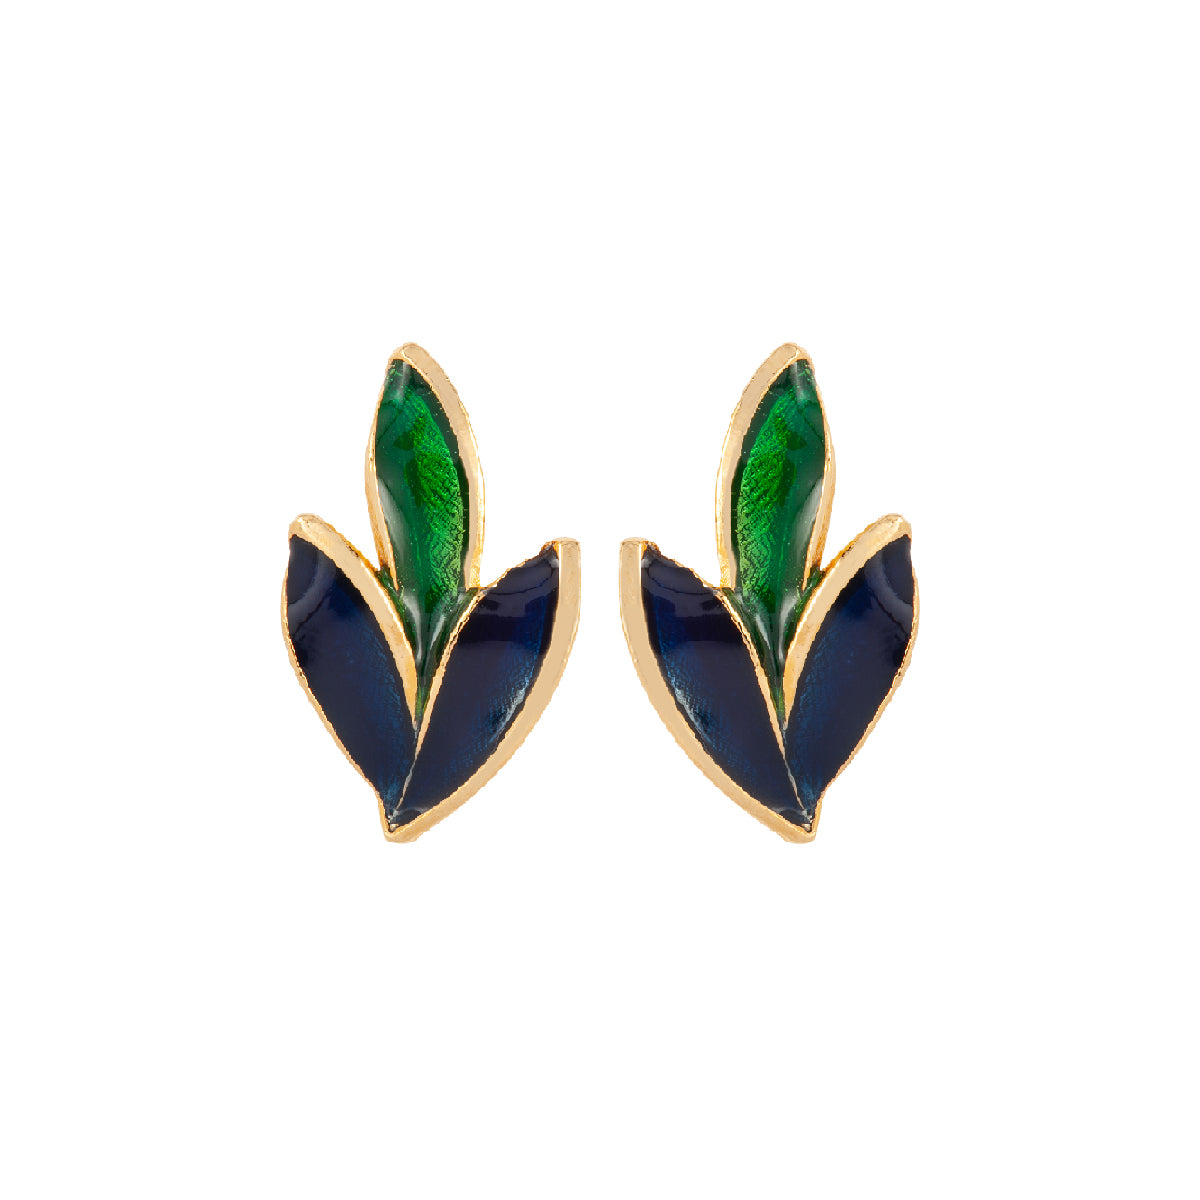 1980s Vintage Gold Plated Leaf Post Earrings